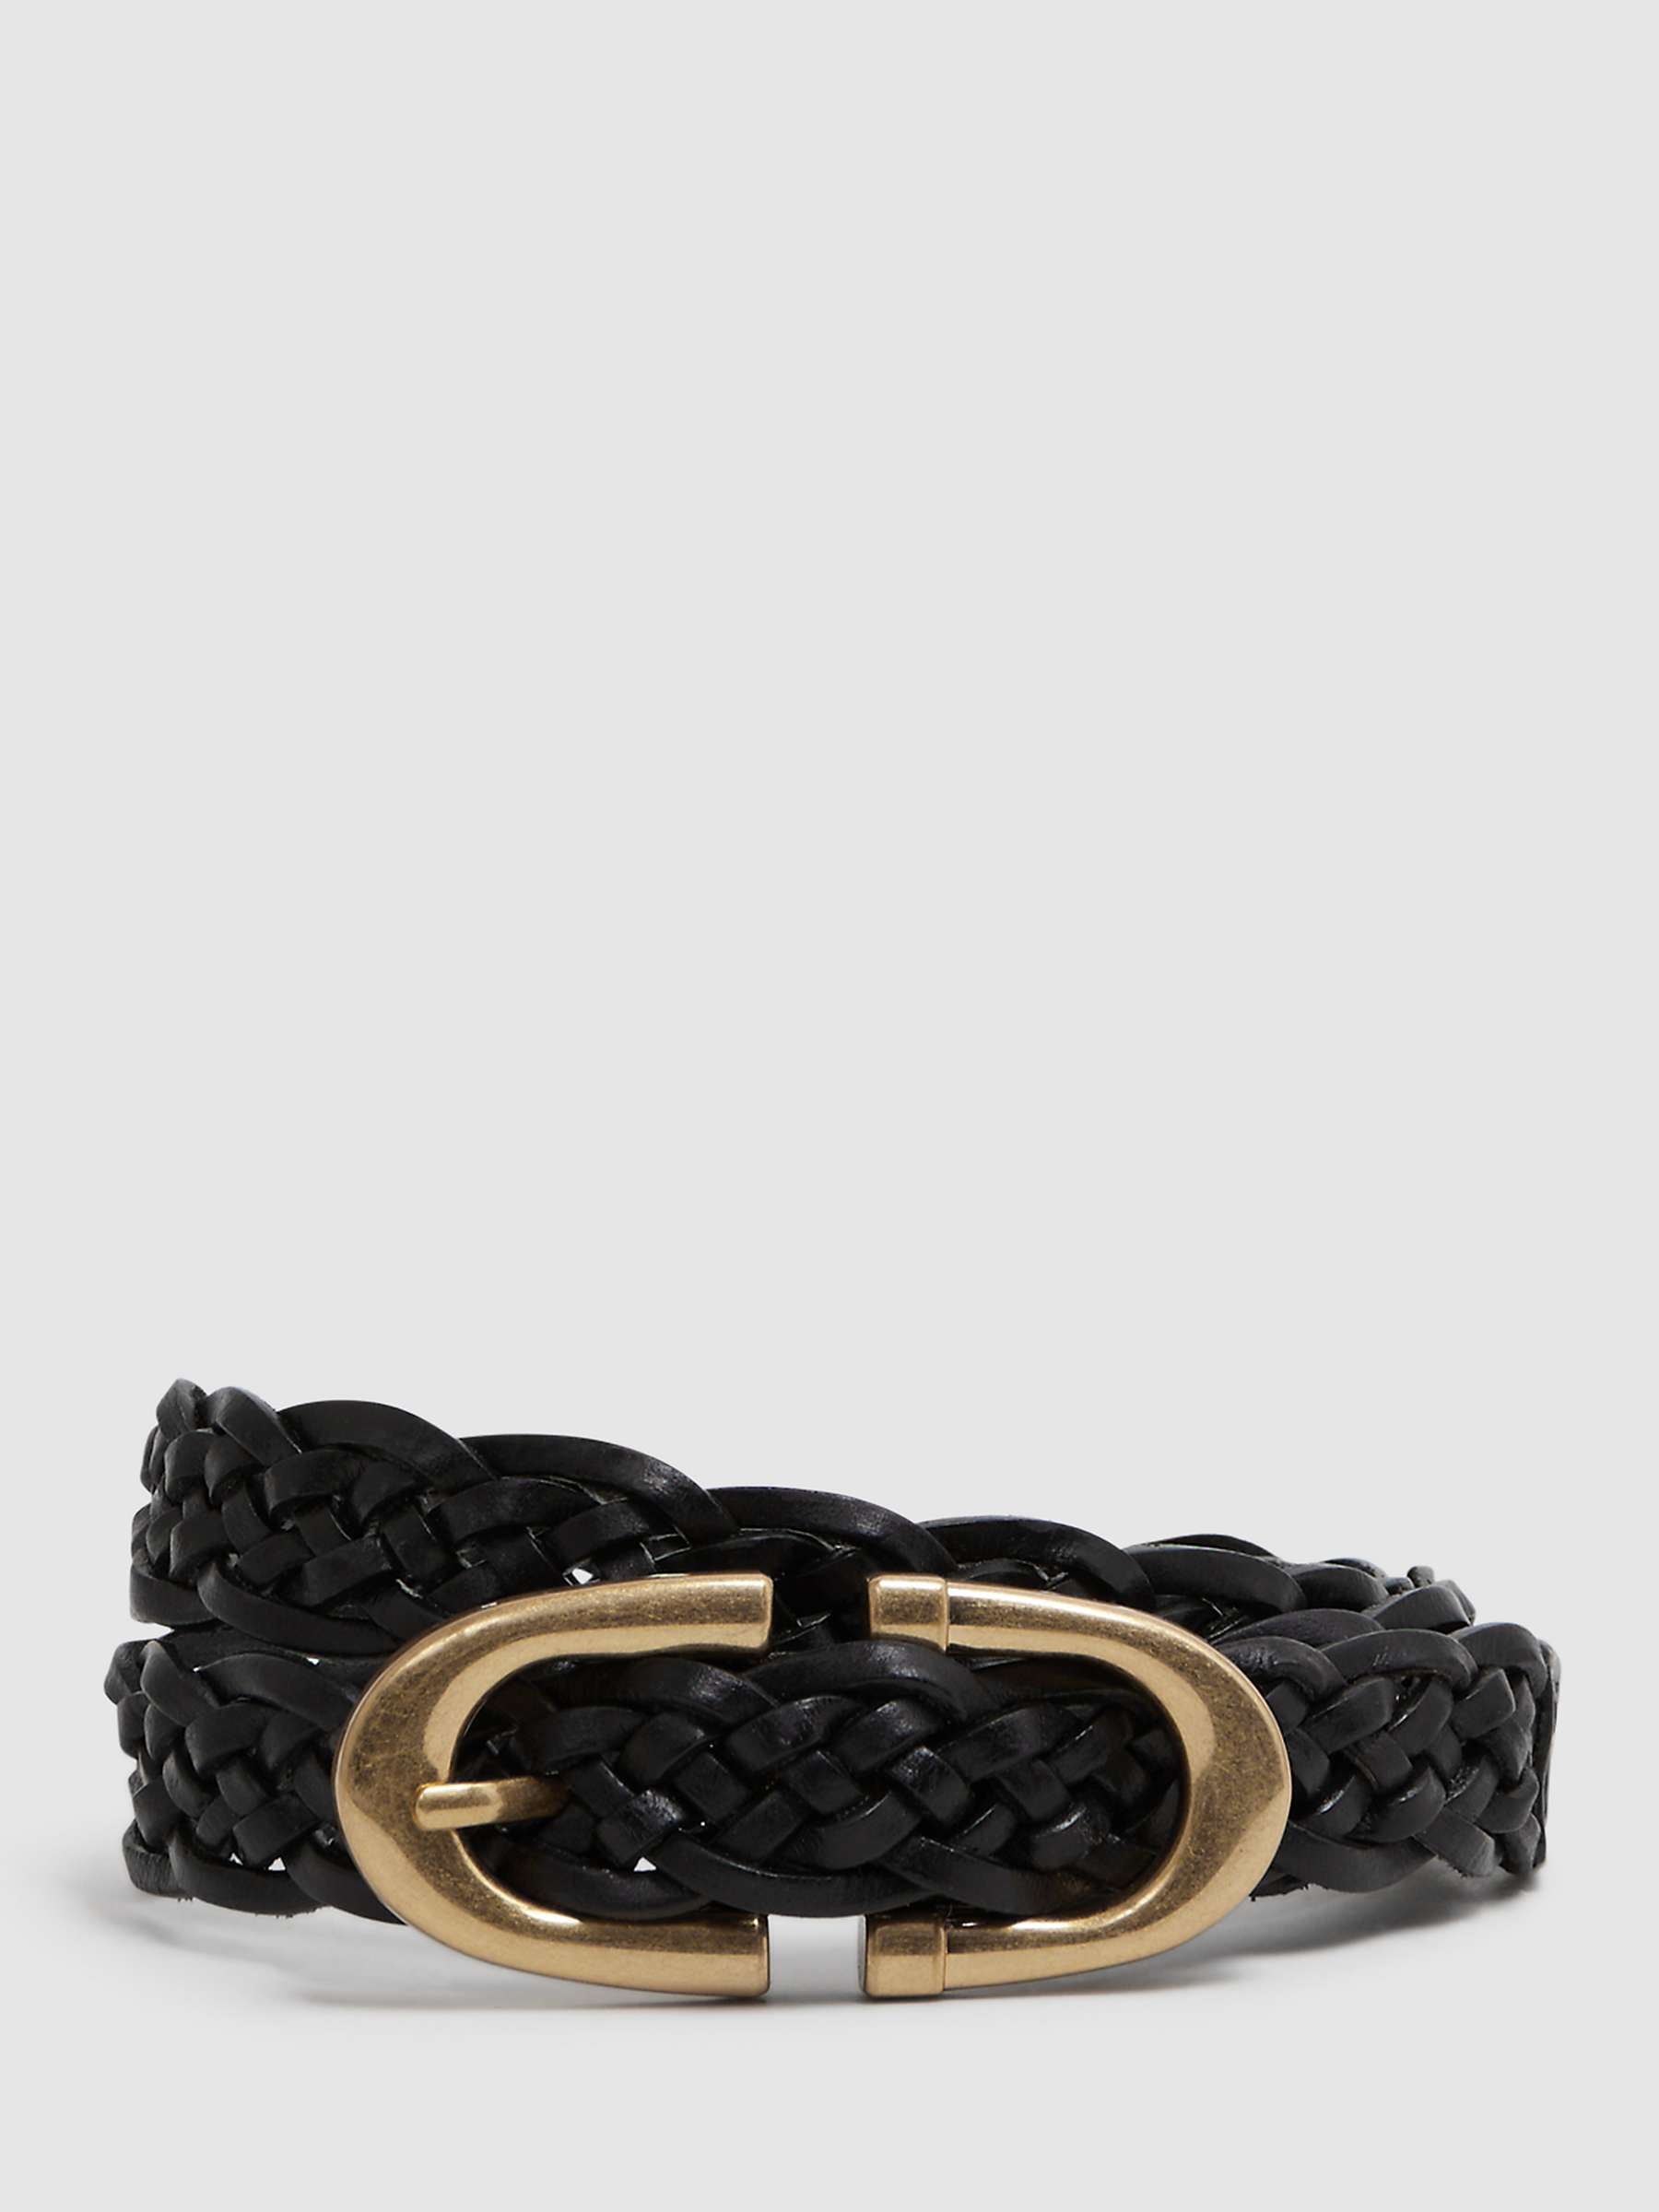 Buy Reiss Bailey Woven Leather Belt Online at johnlewis.com